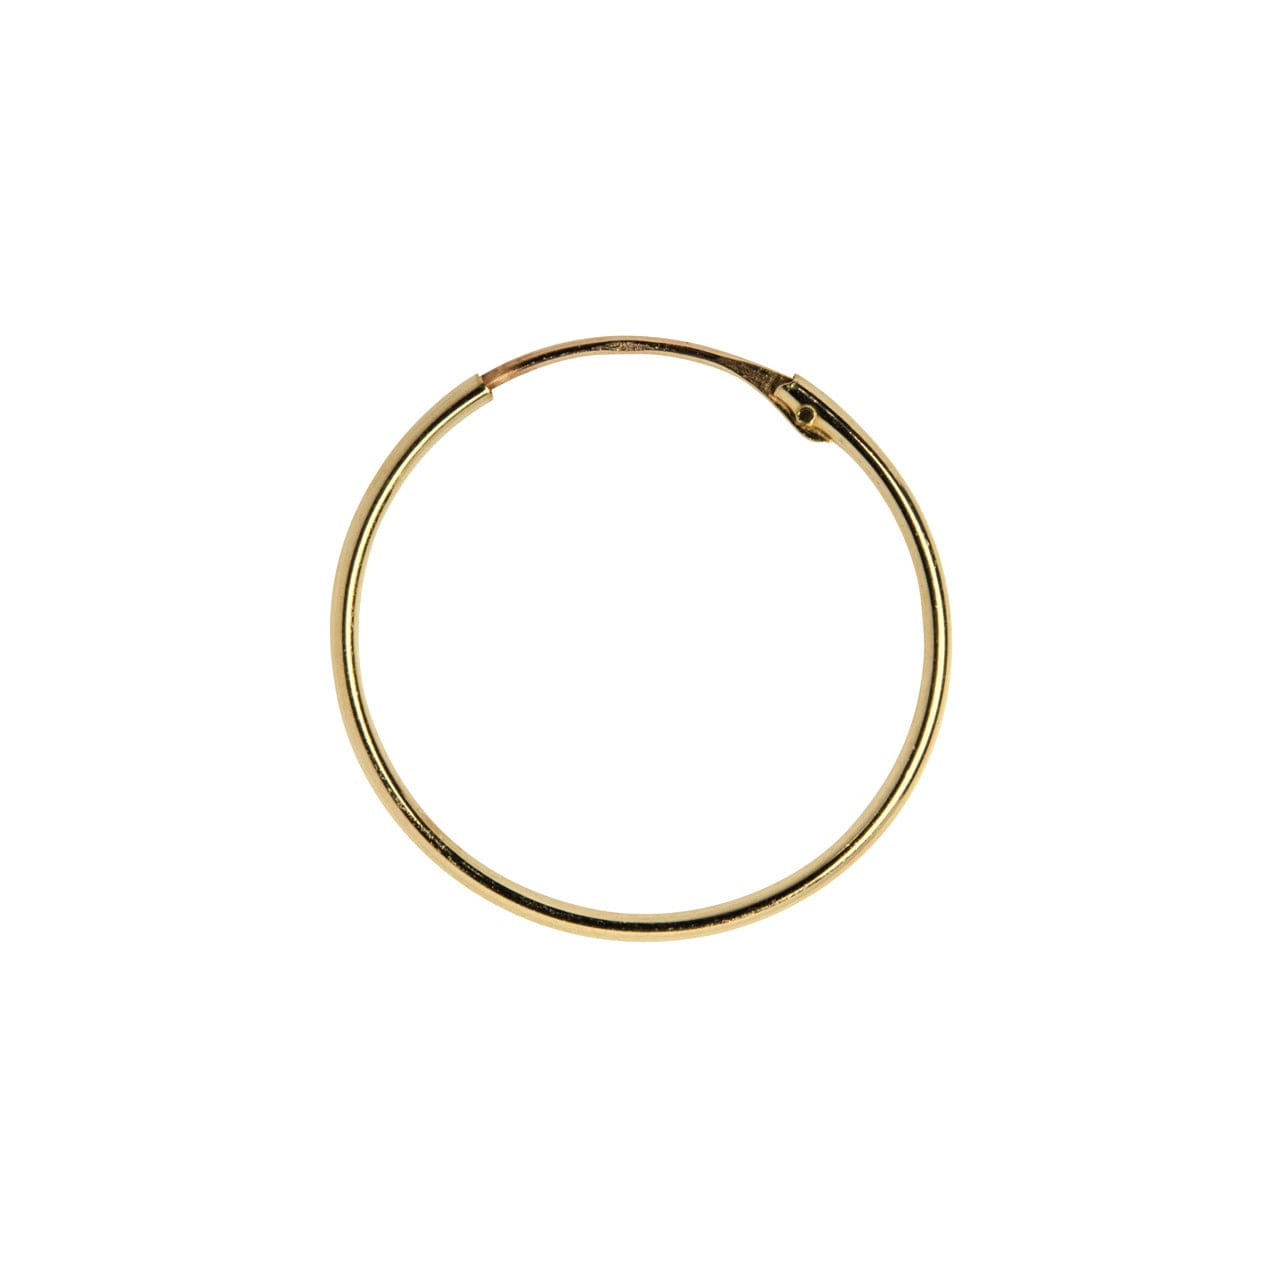 9 ct yellow gold hoop earrings - 18mm - 9ct yellow gold